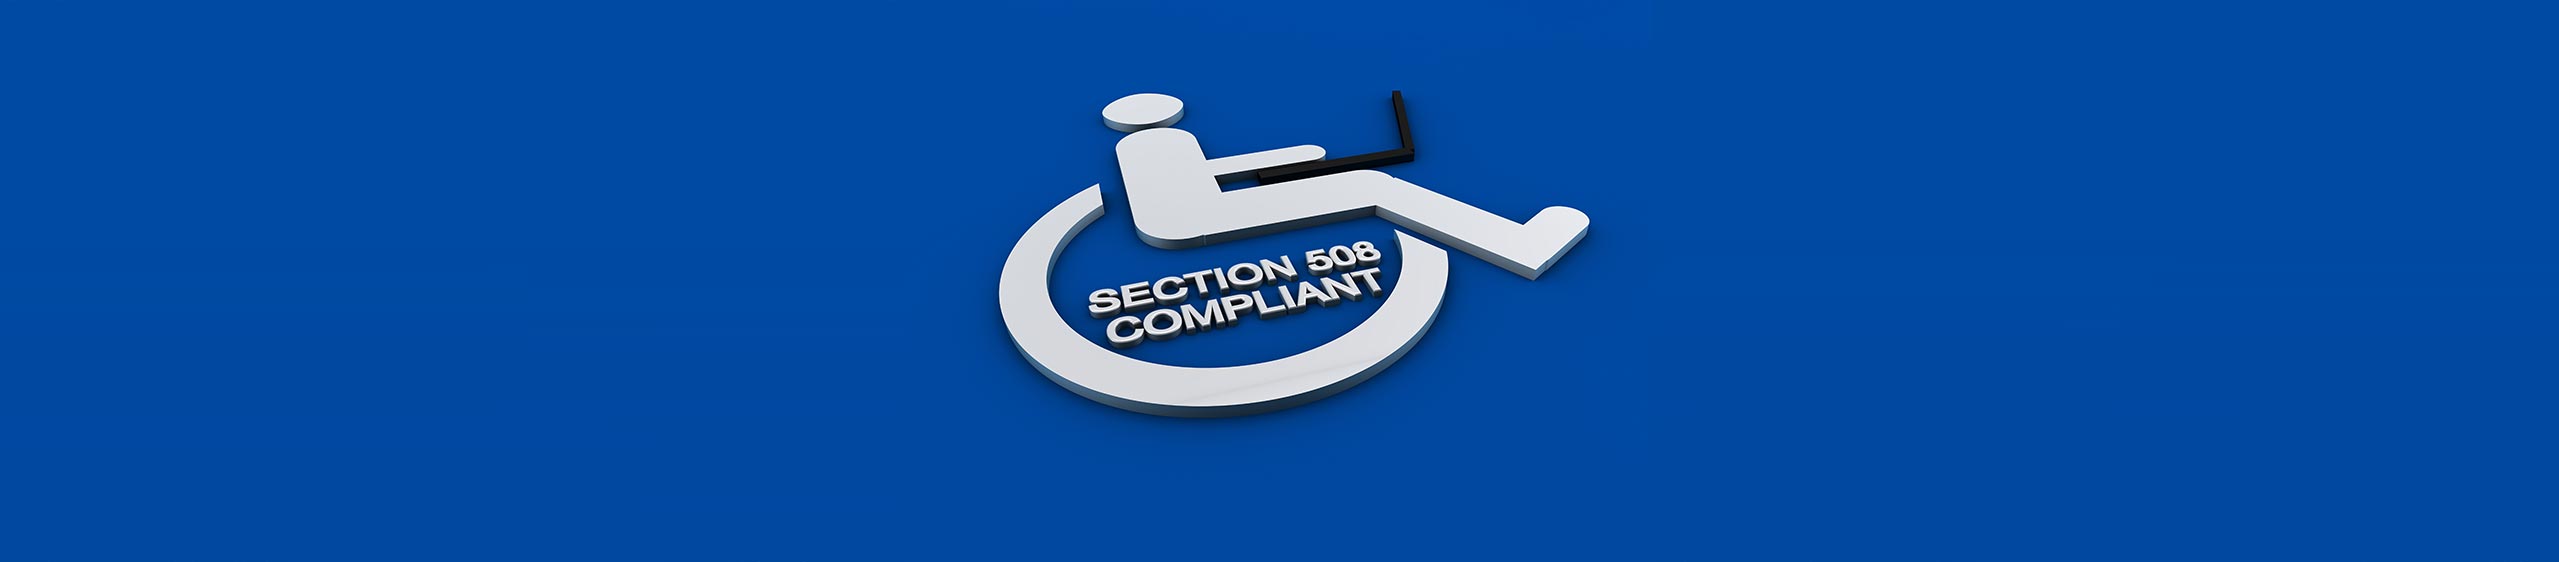 What is Section 508?